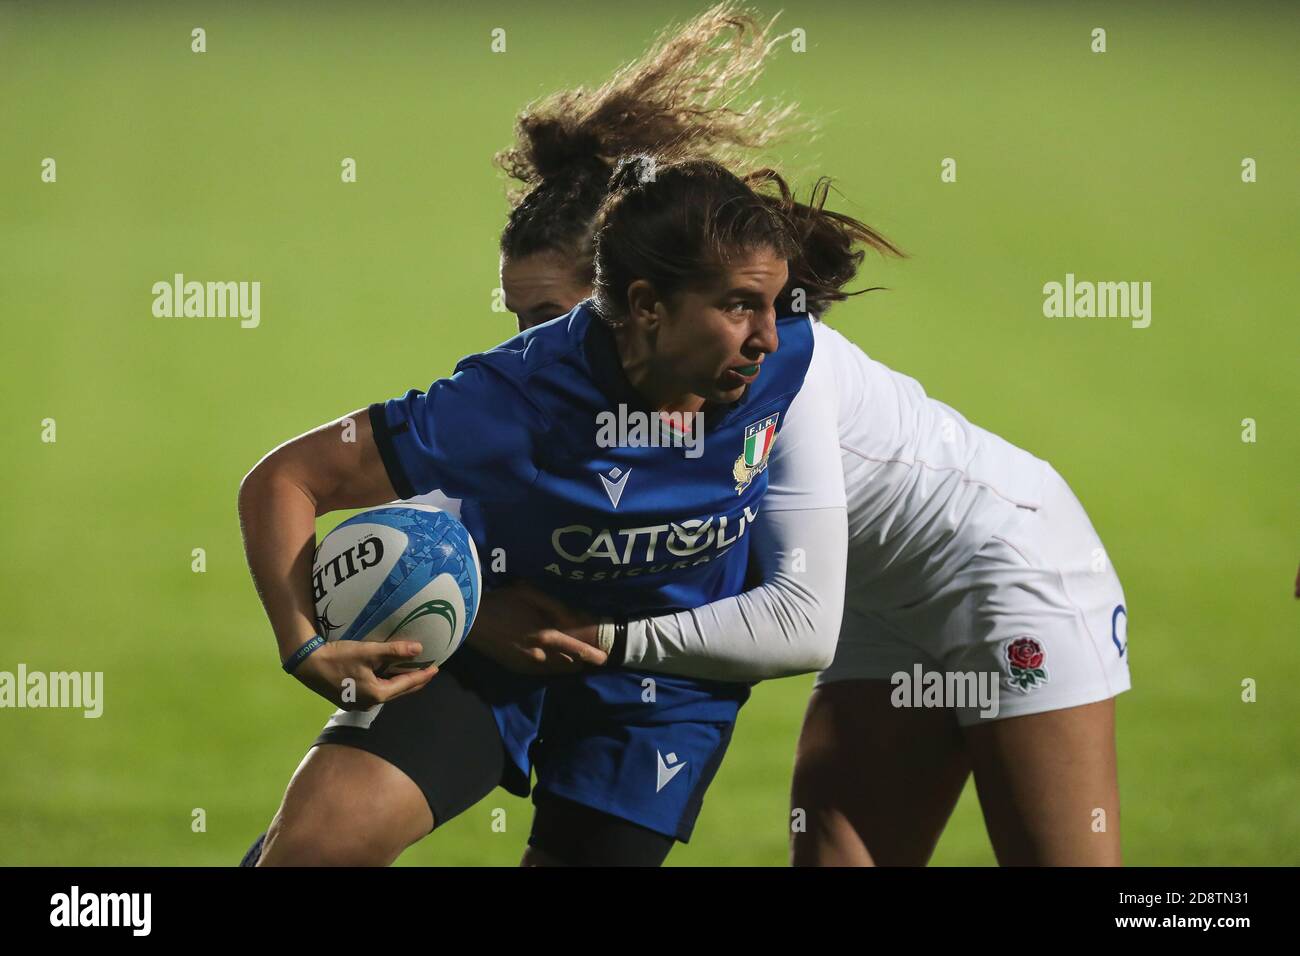 Sergio Lanfranchi stadium, parma, Italy, 01 Nov 2020, Italy wing Maria Magatti tries to keep the ball against Ellie Kildunne (England) during Women&#39;s Guinness Six Nations 2020 - Italy vs England, Rugby Six Nations match - Credit: LM/Massimiliano Carnabuci/Alamy Live News Stock Photo